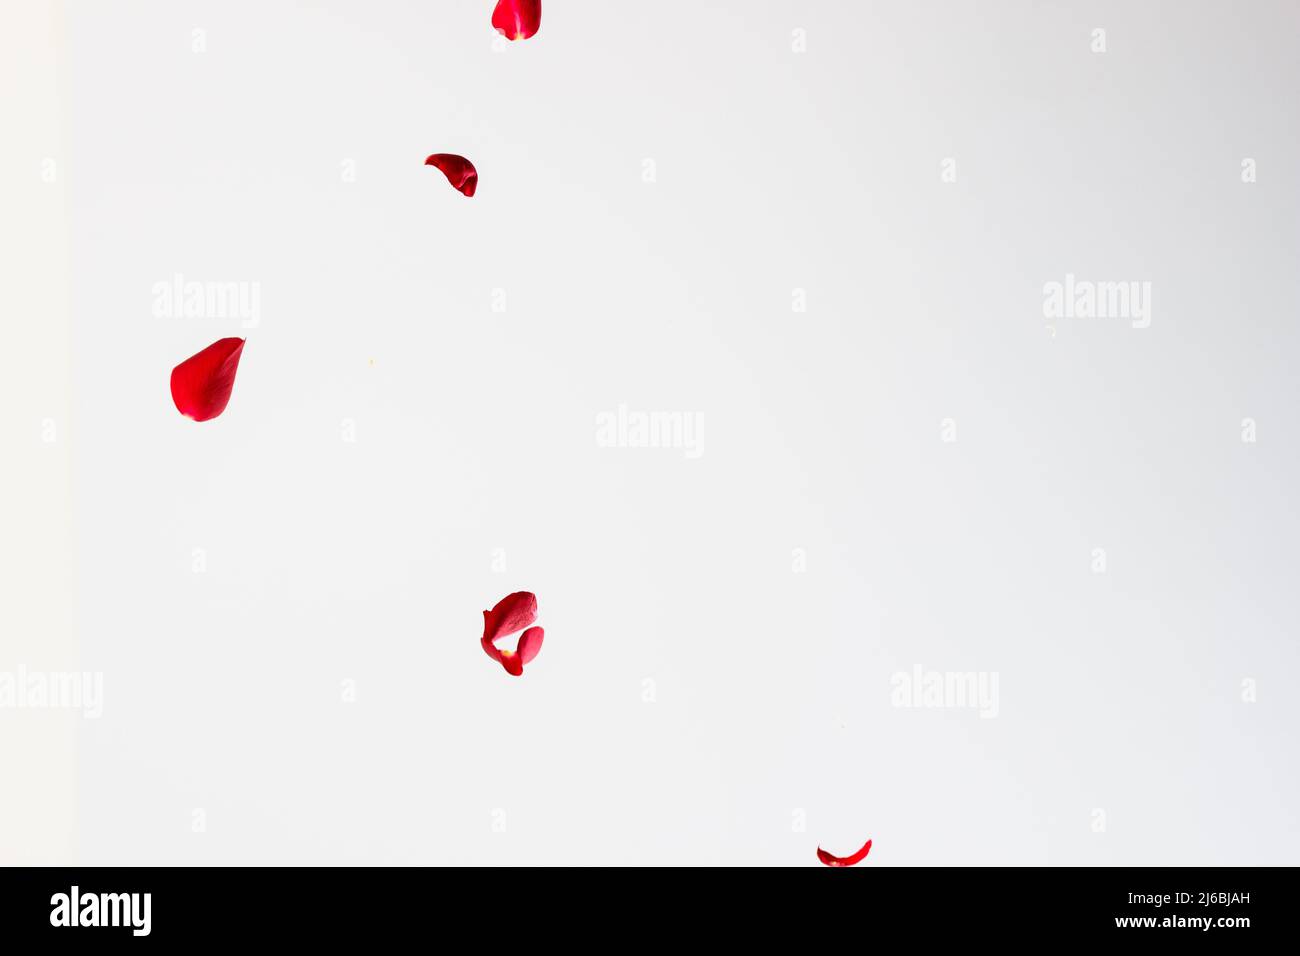 Red Rose Petals Falling in Front of White Background Stock Photo